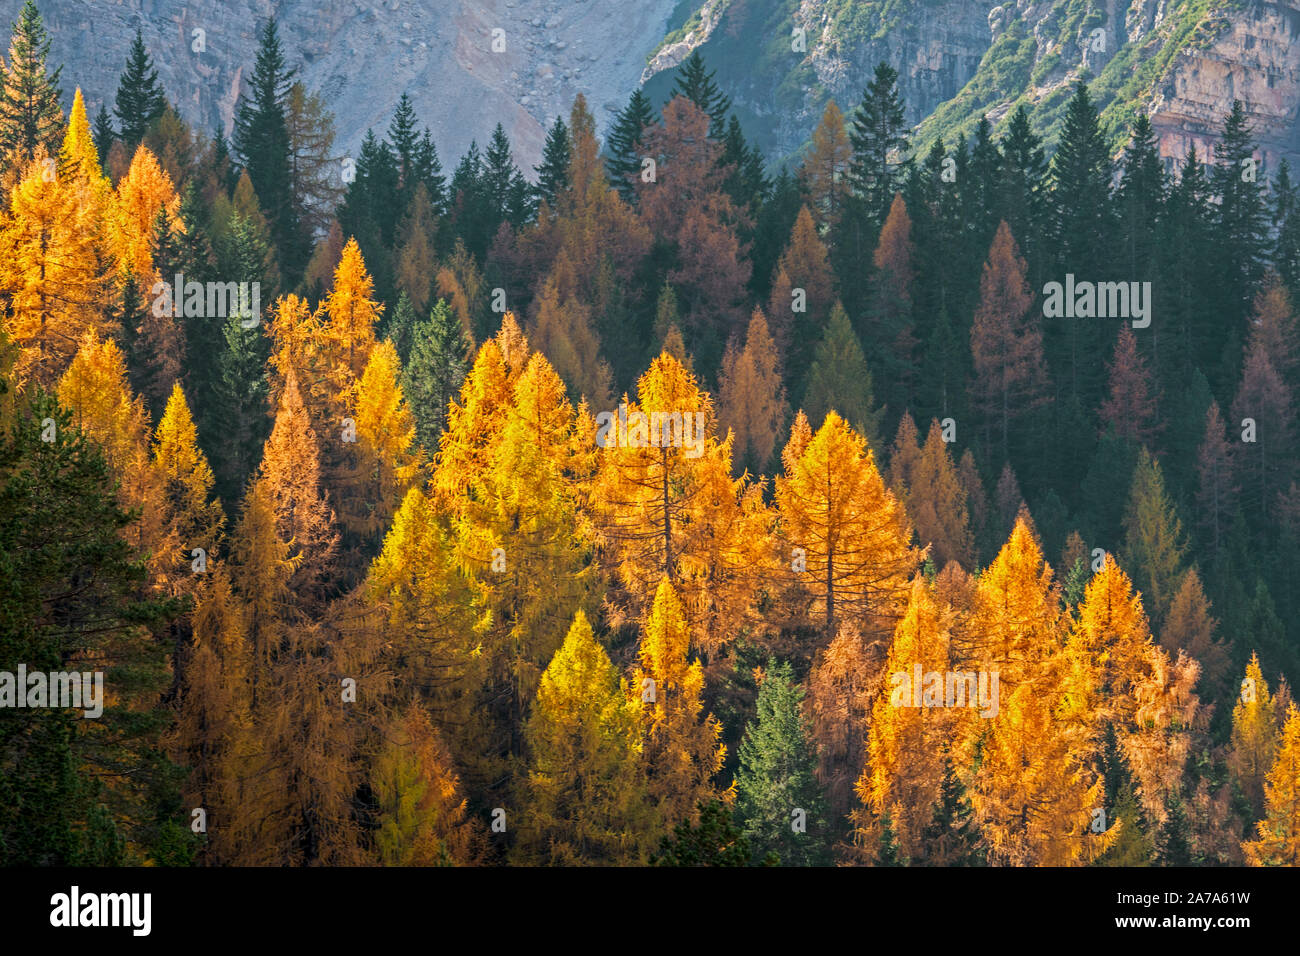 European larch trees (Larix decidua) and spruces in coniferous woodland on mountain slope showing autumn colours in the fall Stock Photo